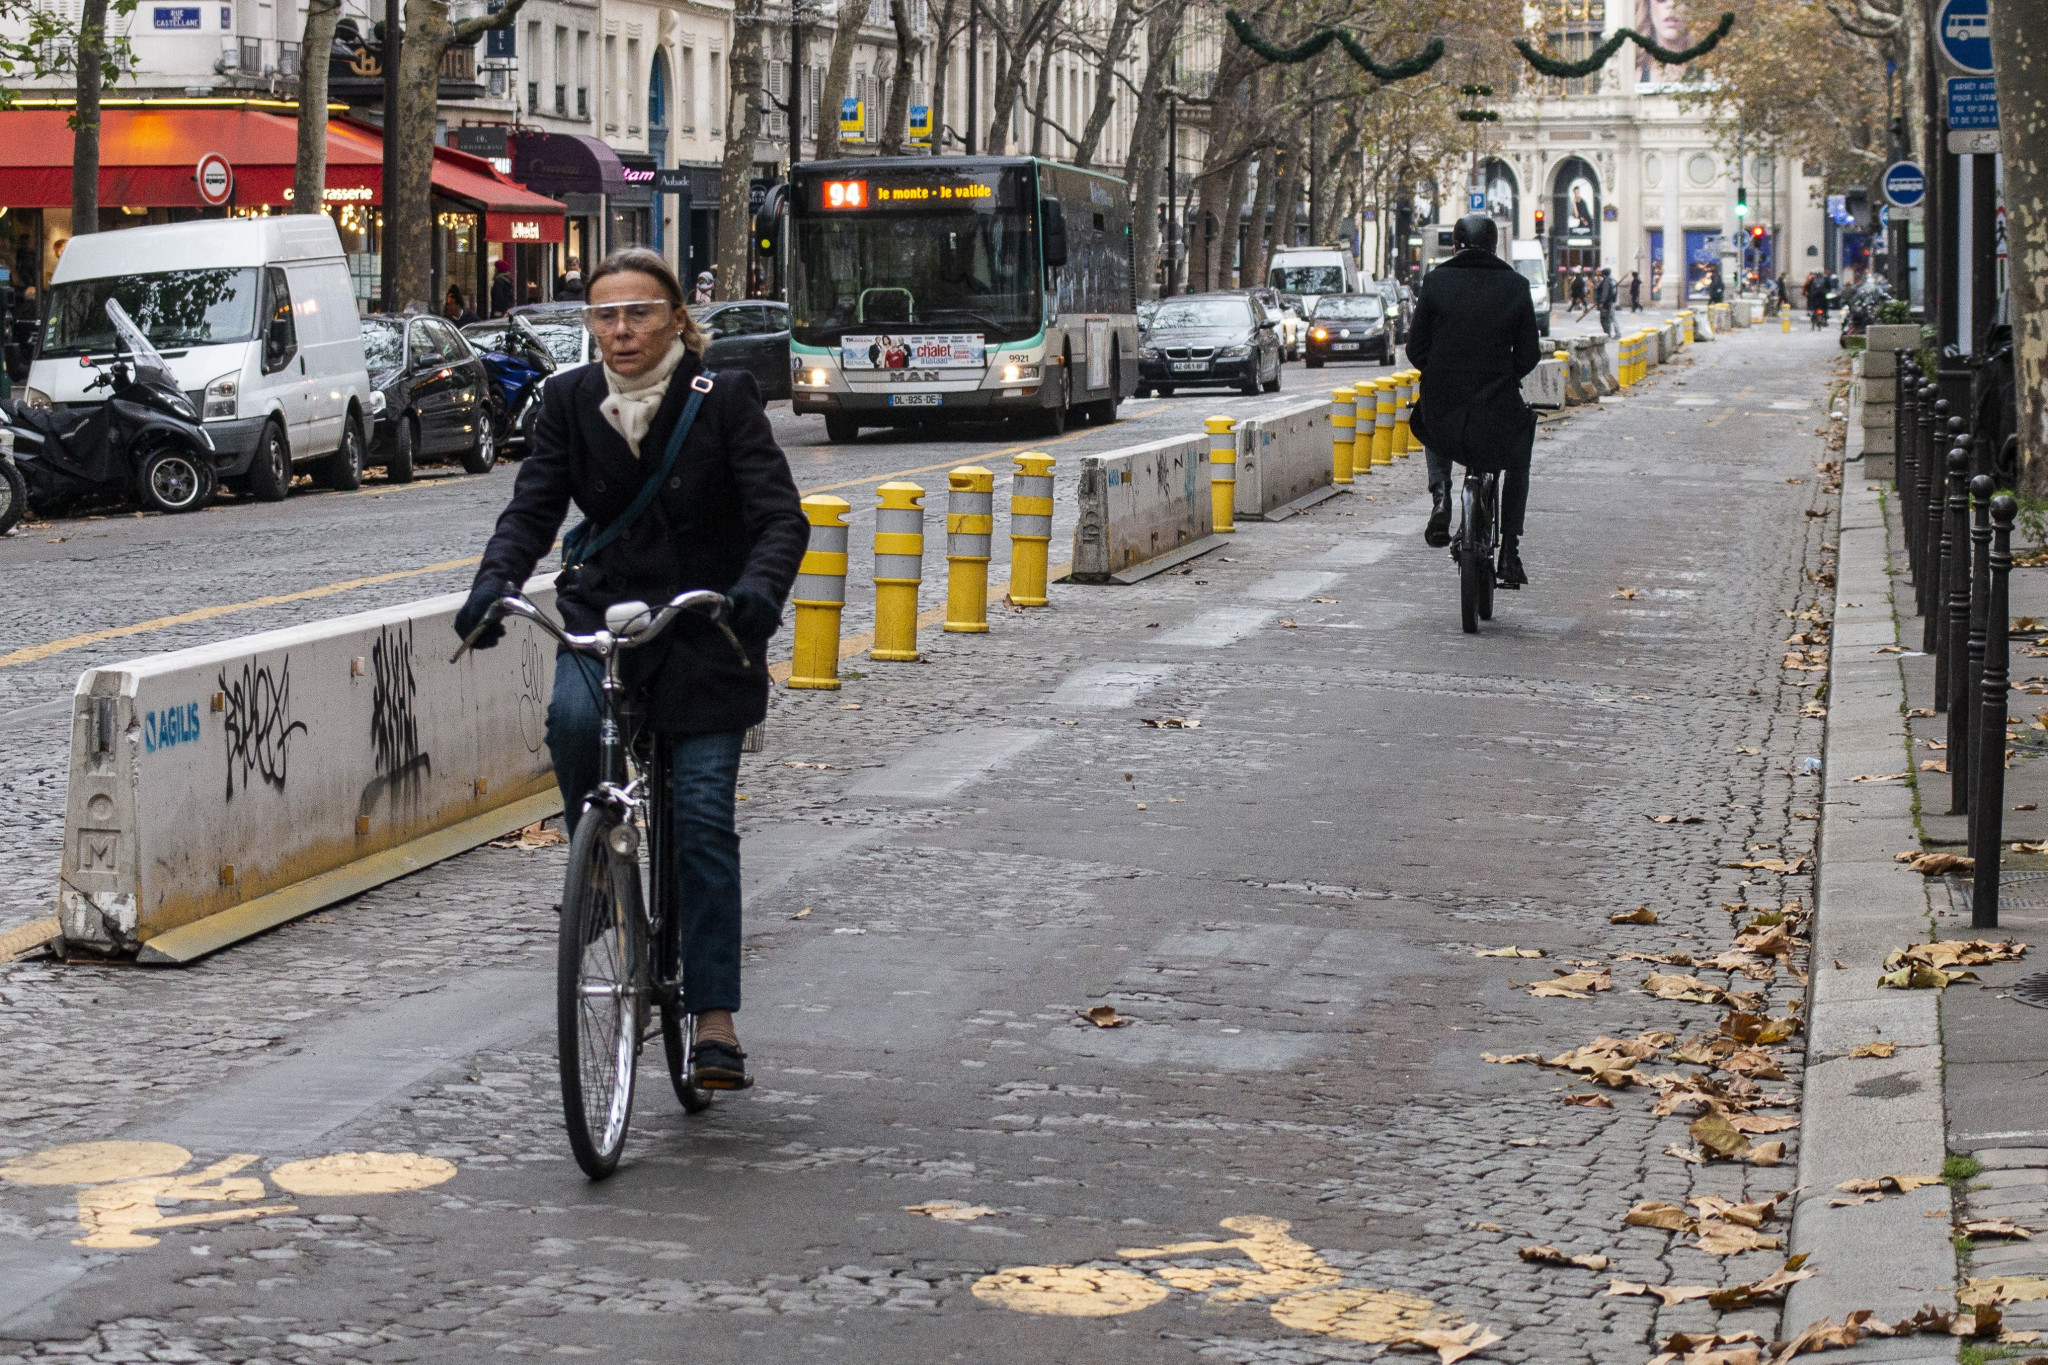 Majority of Paris 2024 venues not accessible by bikes, claims cycling group